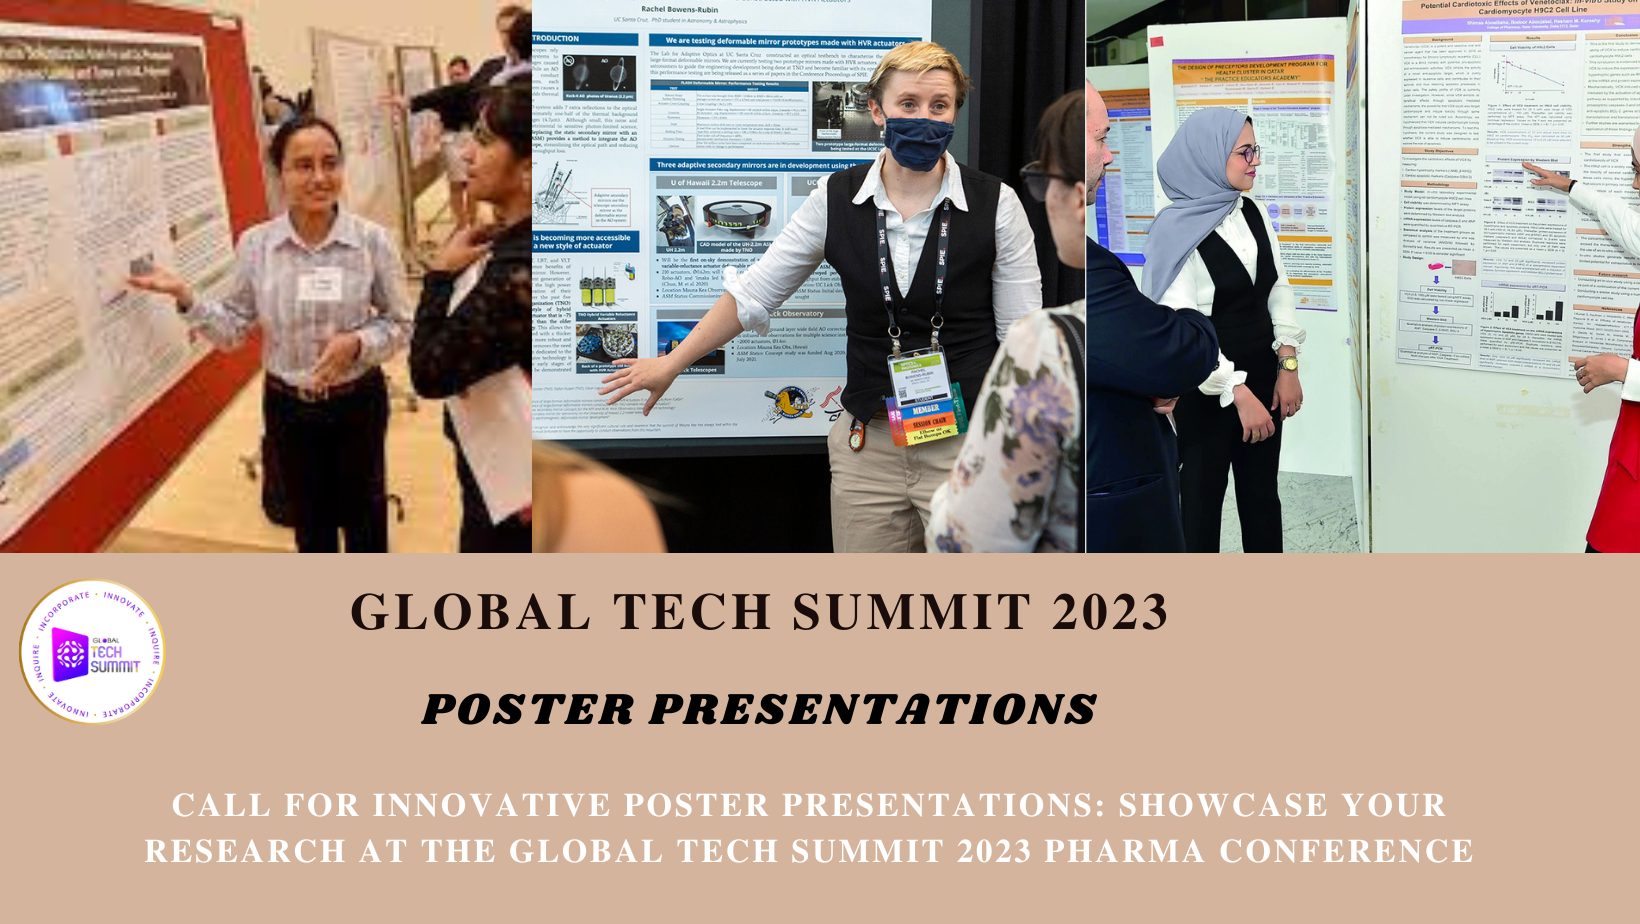 Call for Innovative Poster Presentations: Showcase Your Research at the Global Tech Summit 2023 Pharma Conference